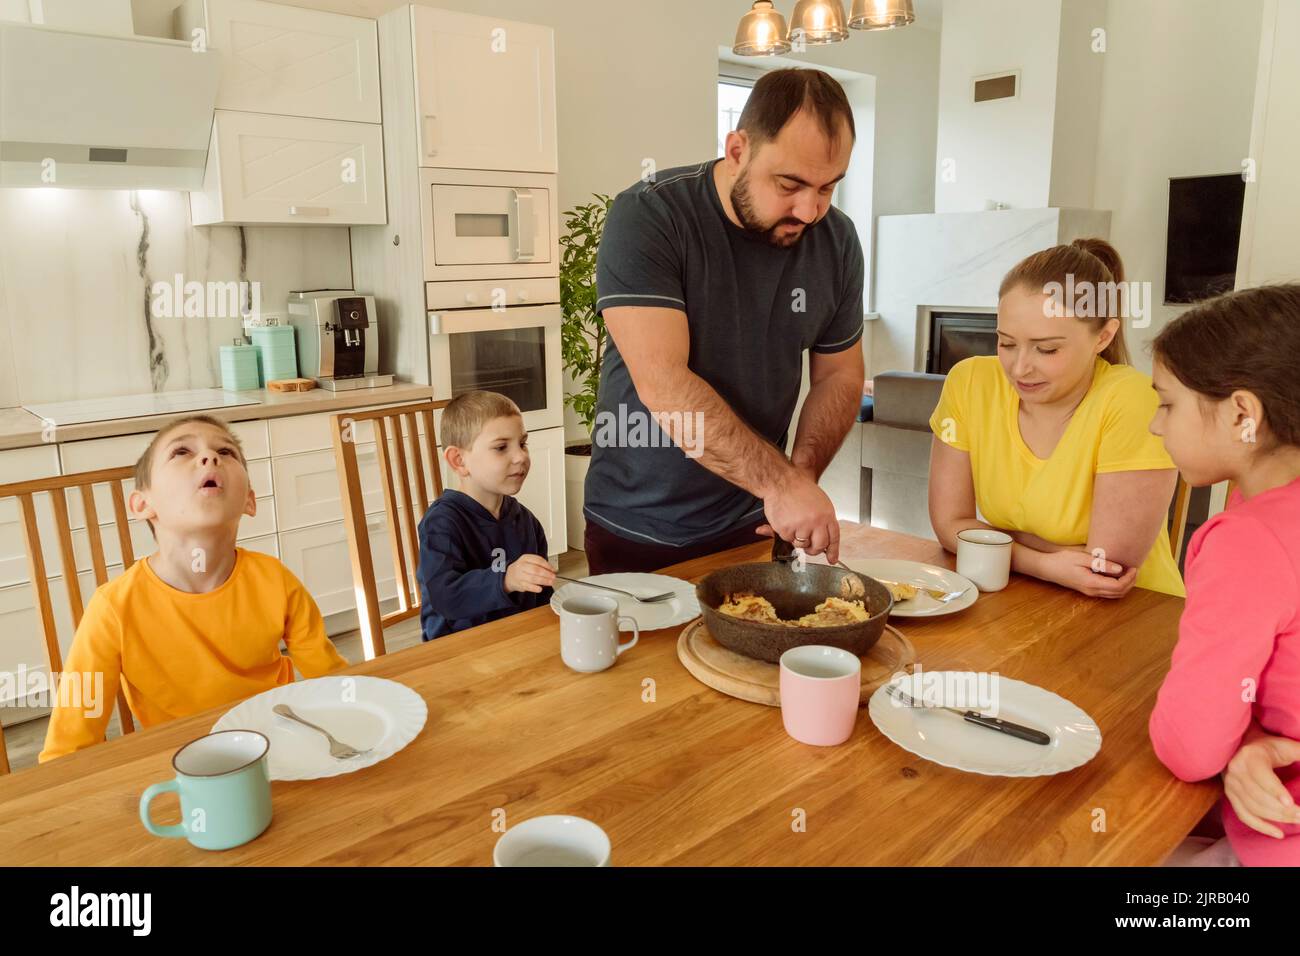 Father serving breakfast to woman and children at home Stock Photo